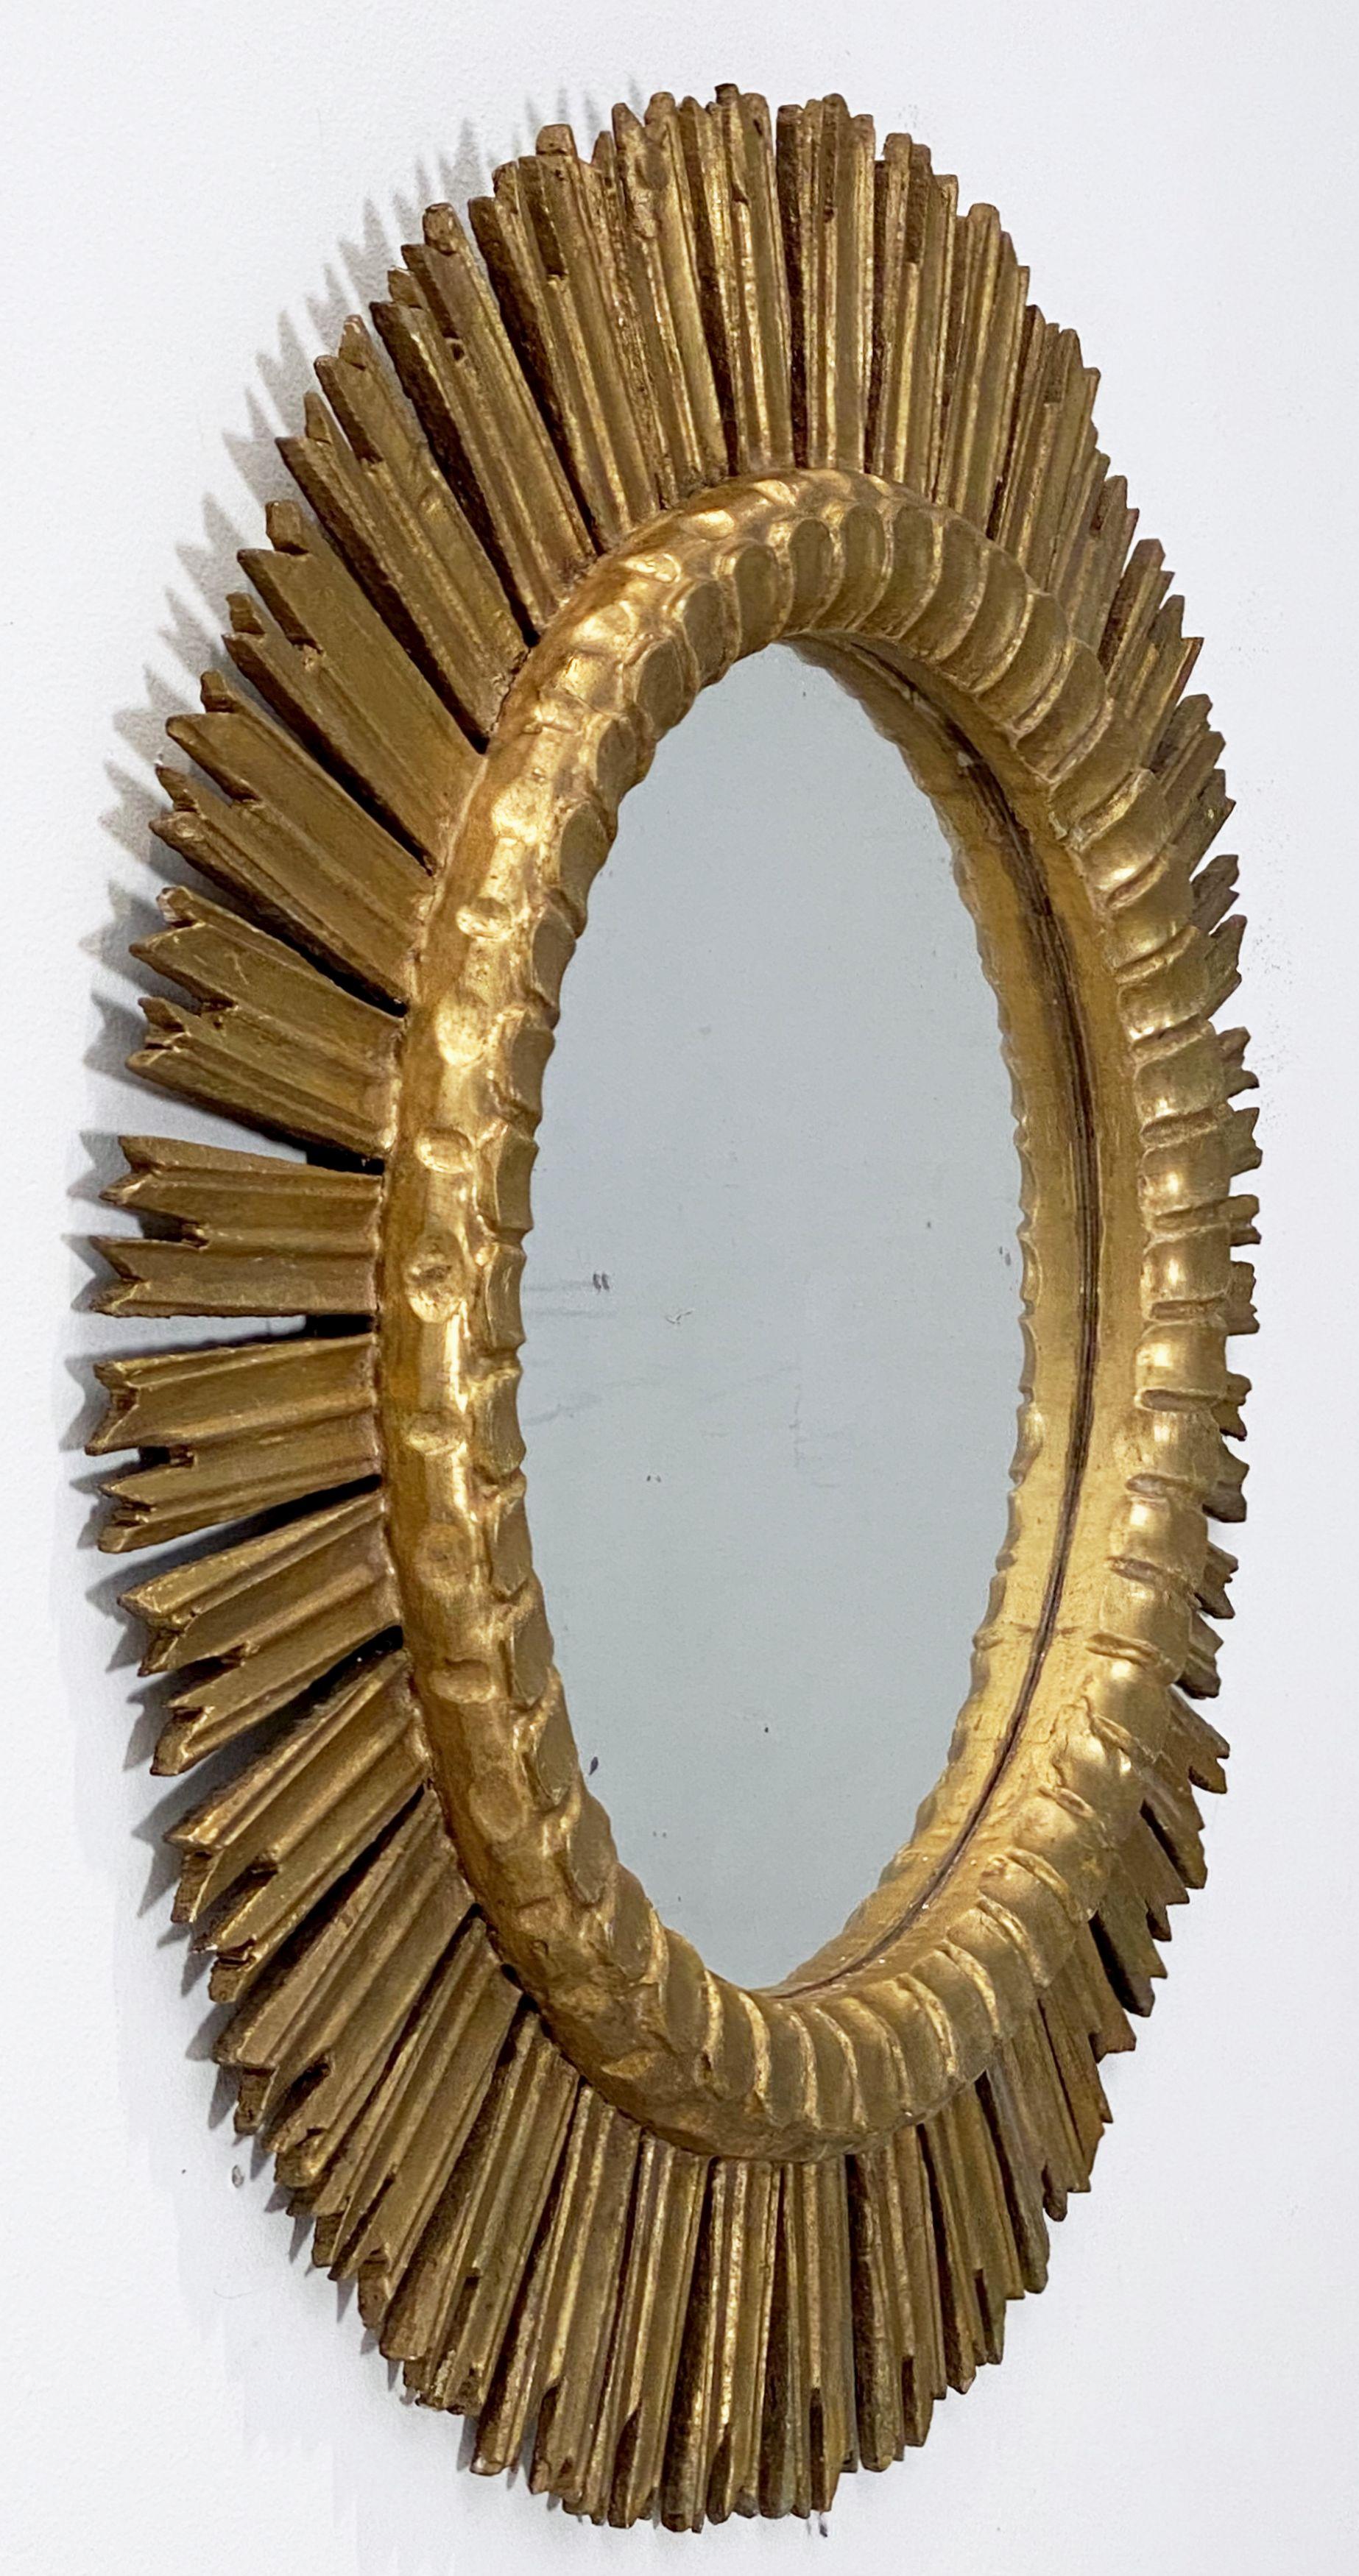 A lovely large French gilt sunburst (or starburst) mirror with round mirrored glass center in a moulded frame.

Diameter of 25 1/2 inches